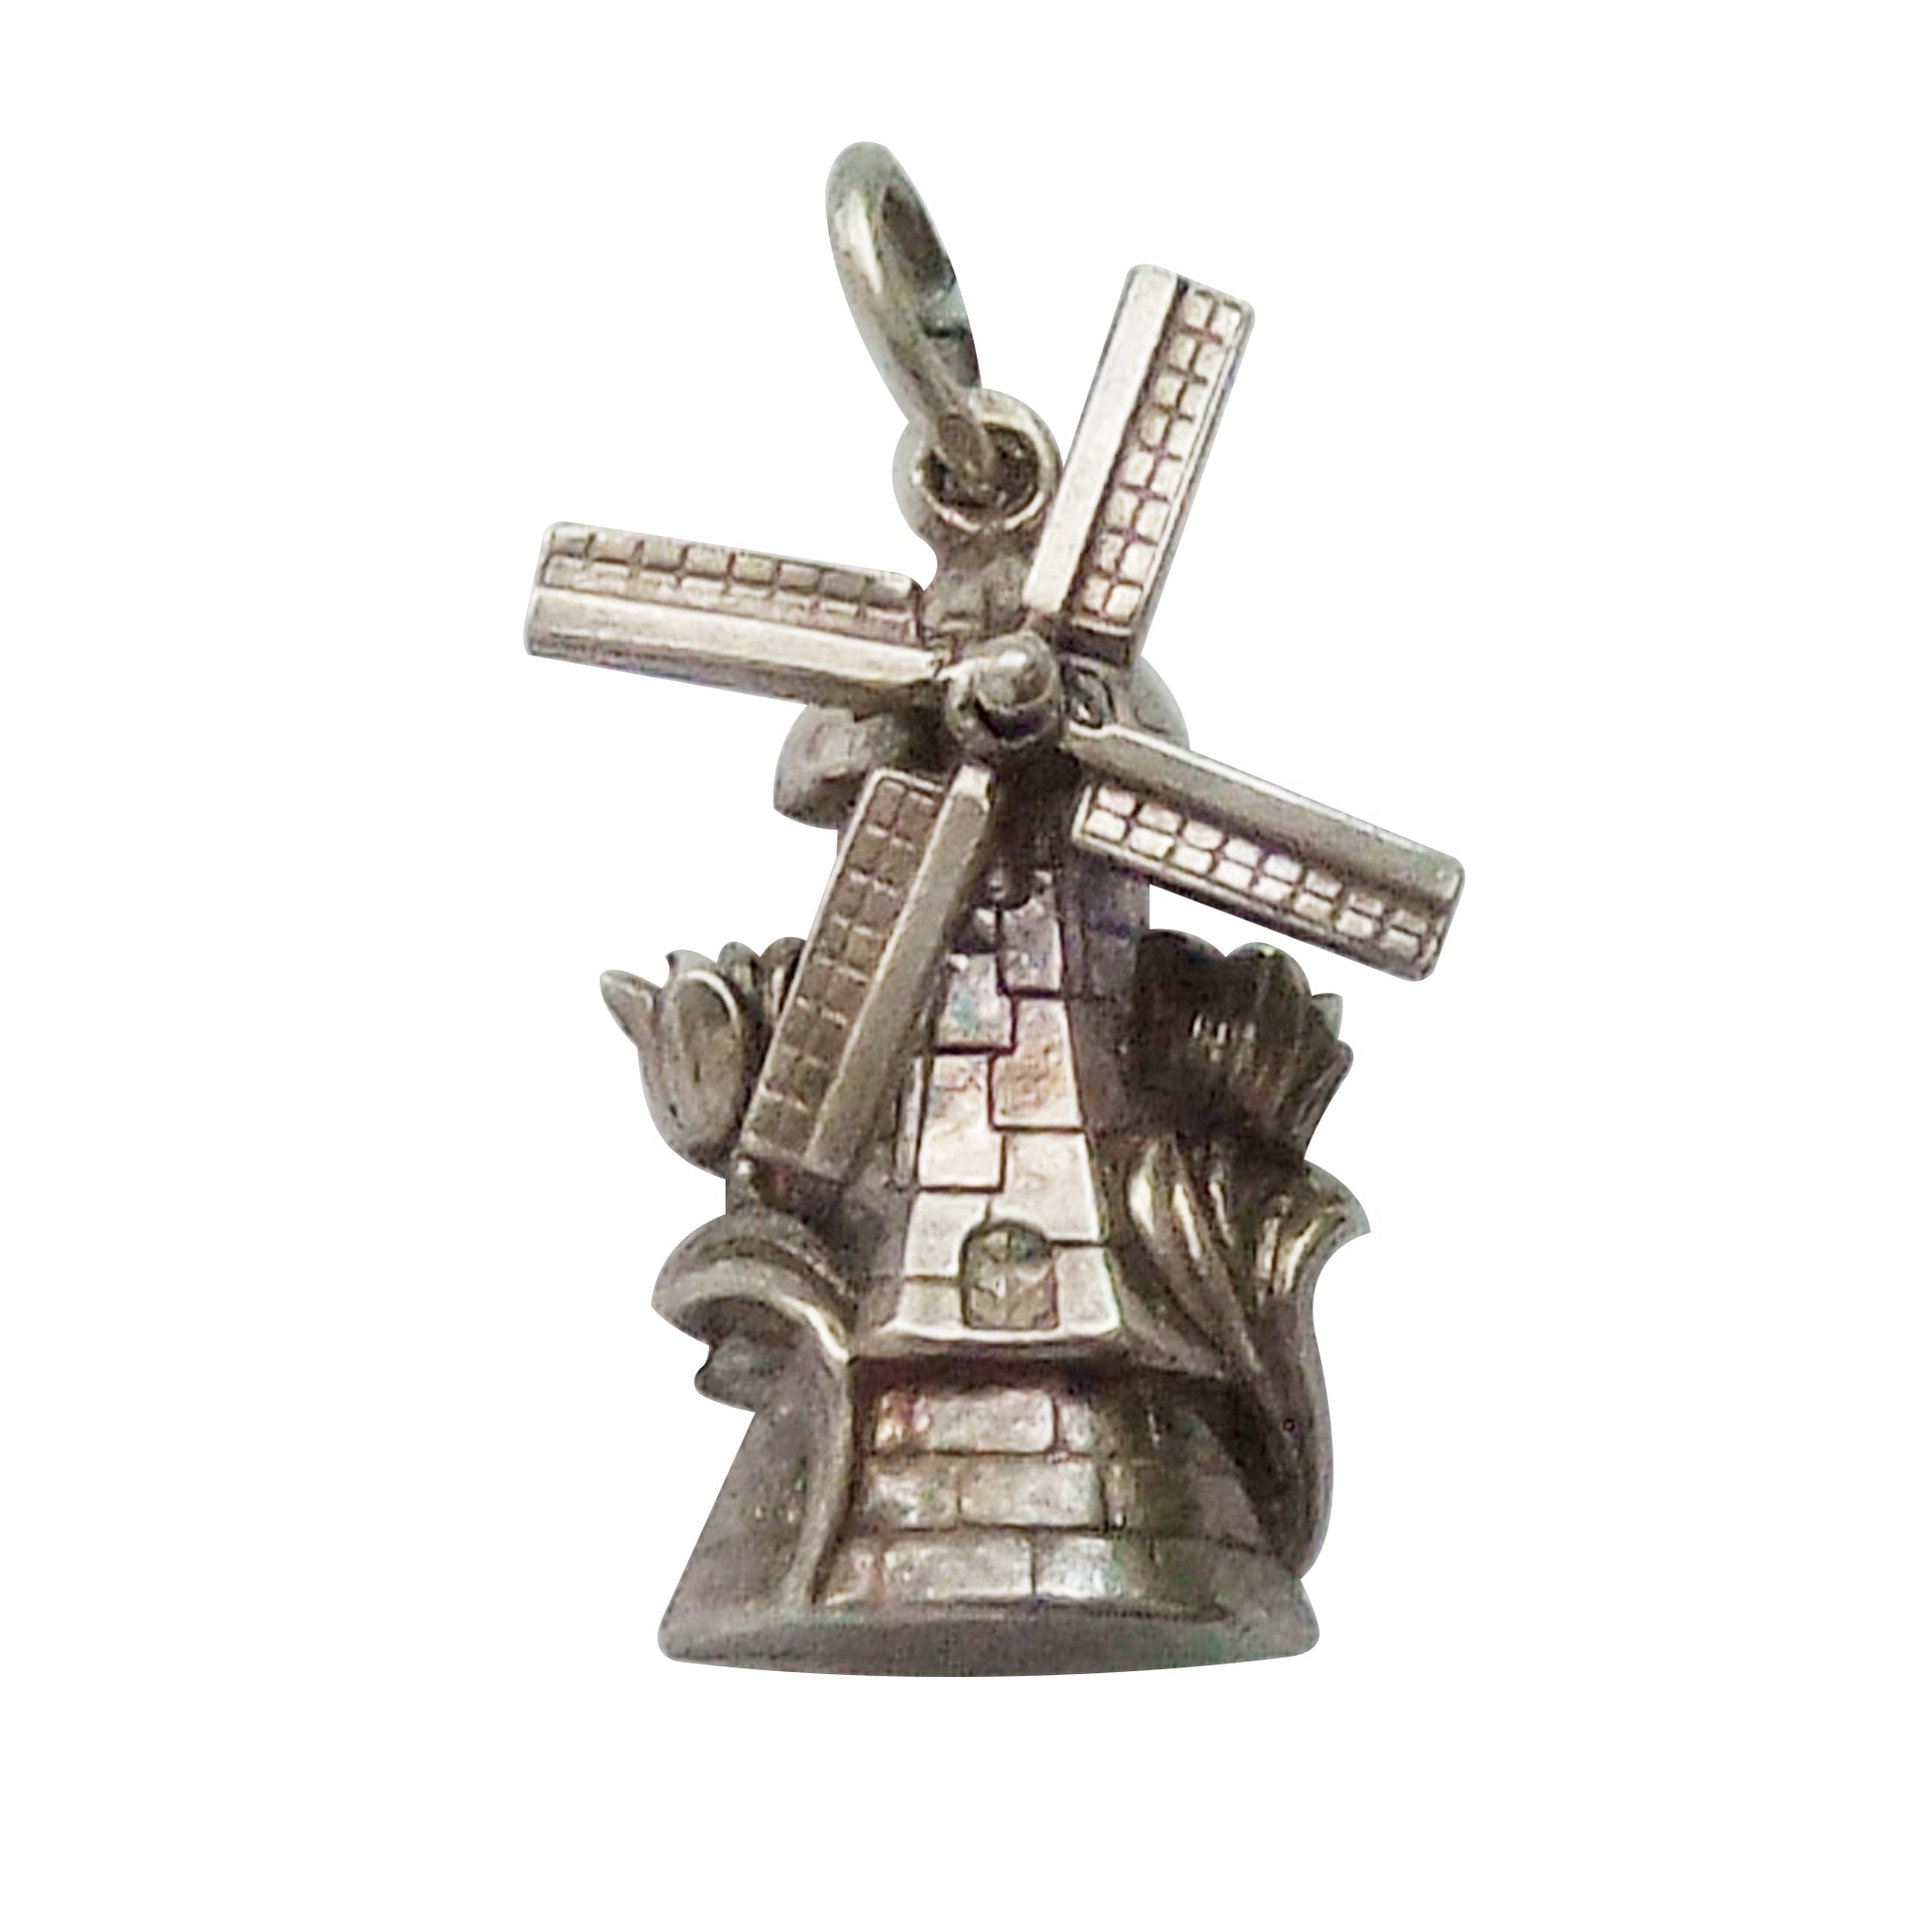 Vintage windmill charm with rotating sails and tulips